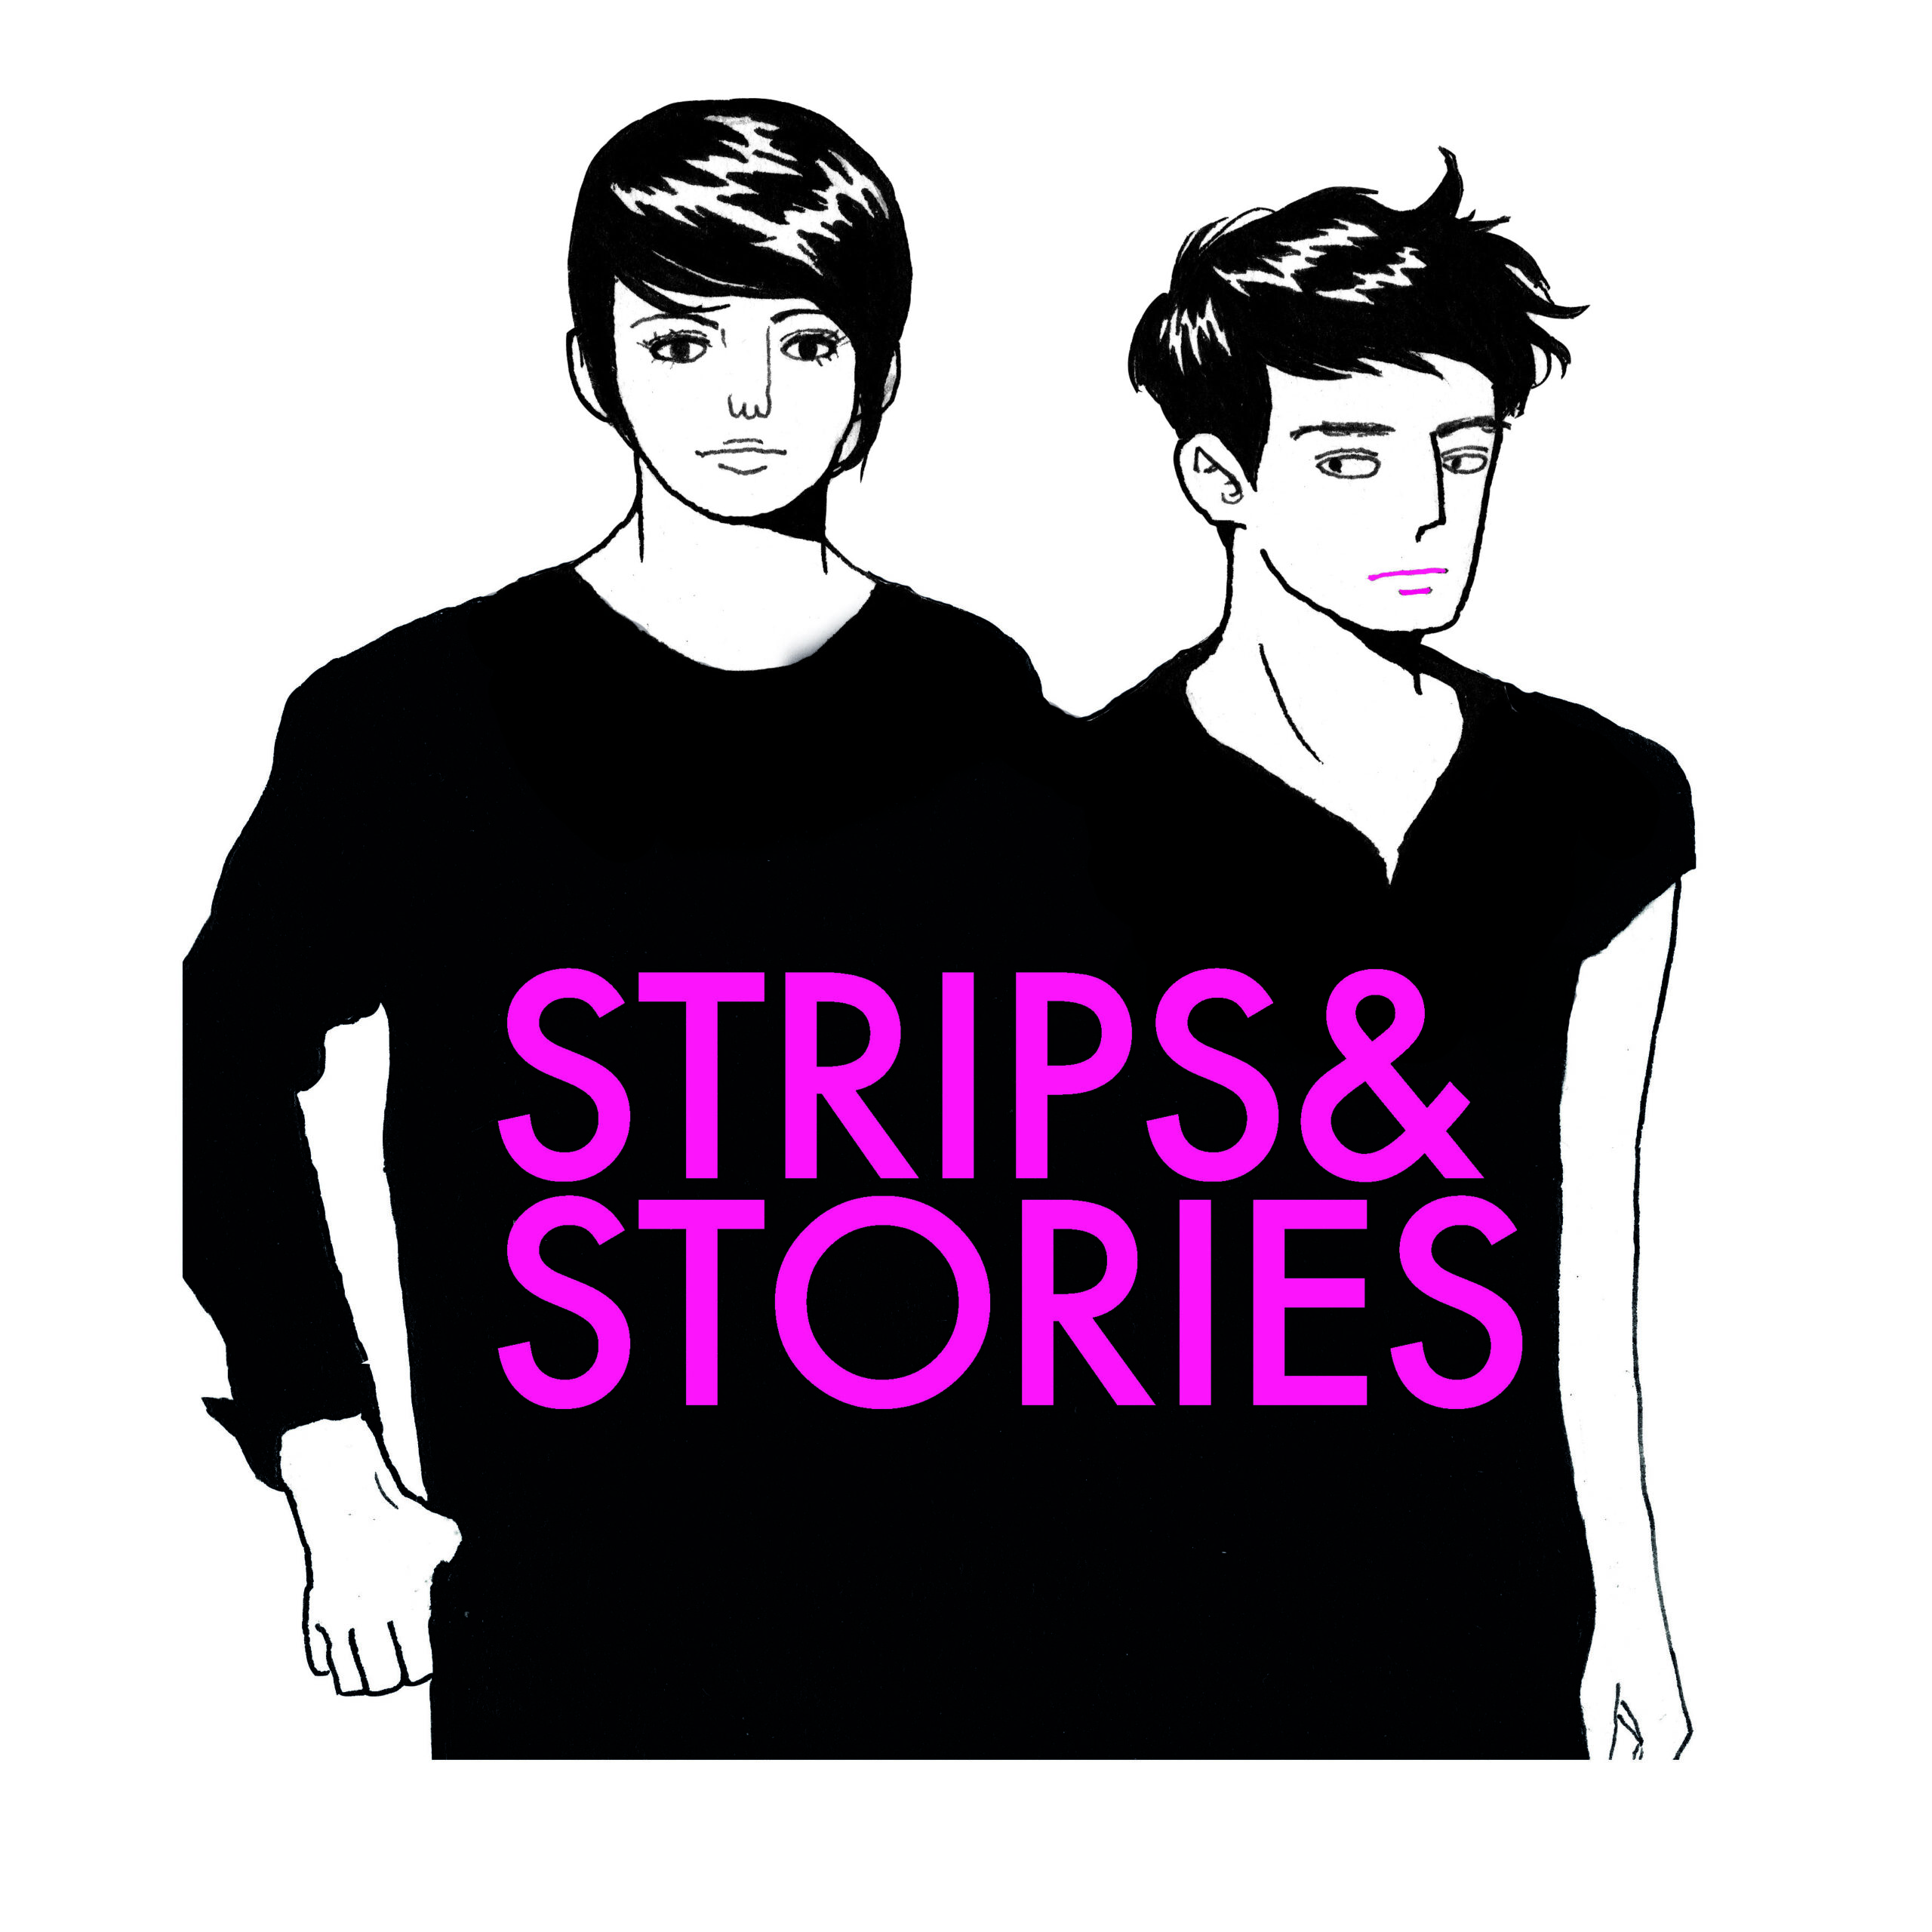 Strips & Stories